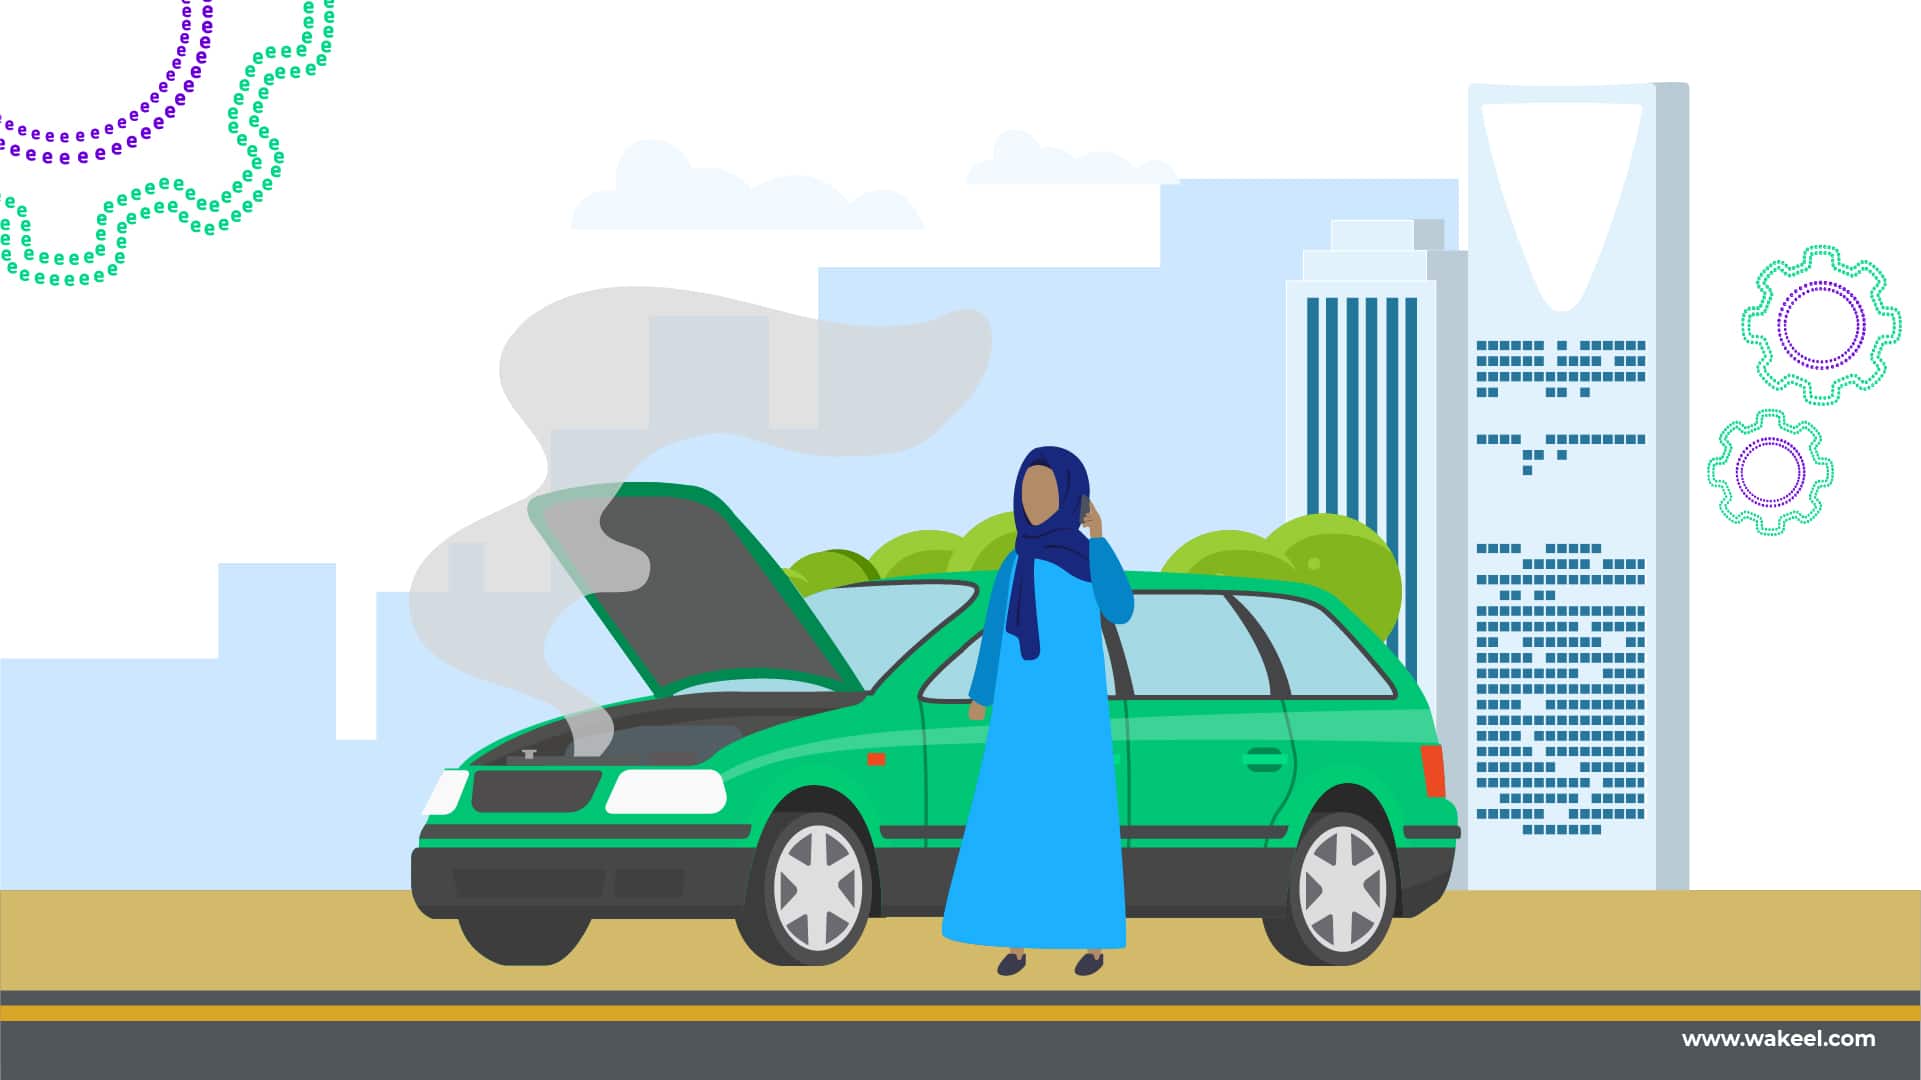 Common Types of Roadside Assistance in Saudi